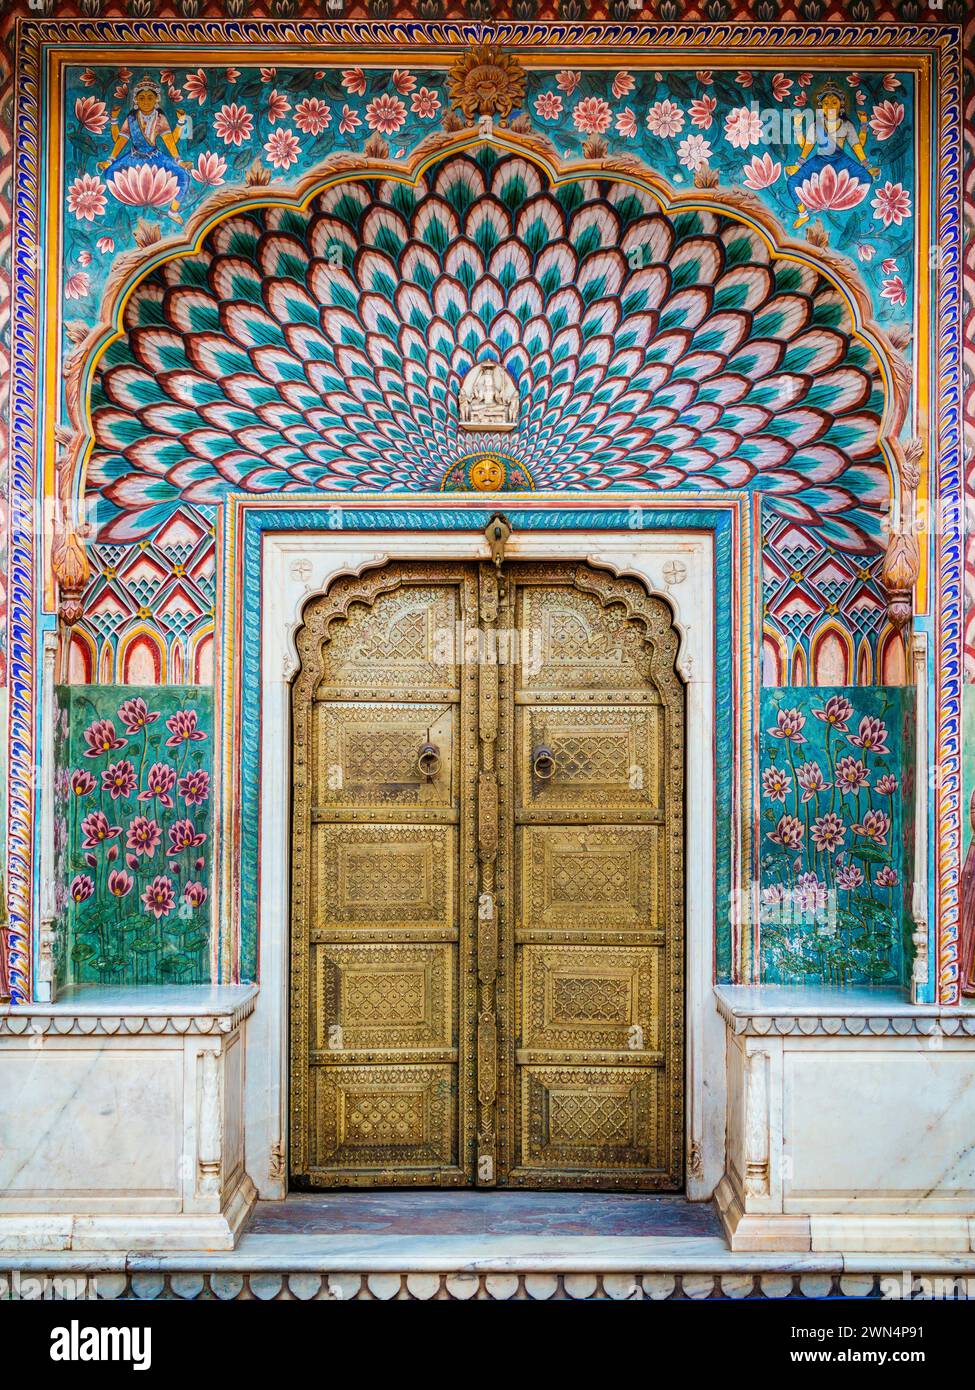 Das farbenfrohe Lotus-Tor am Jaipur City Palace in Rajasthan, Indien. Stockfoto